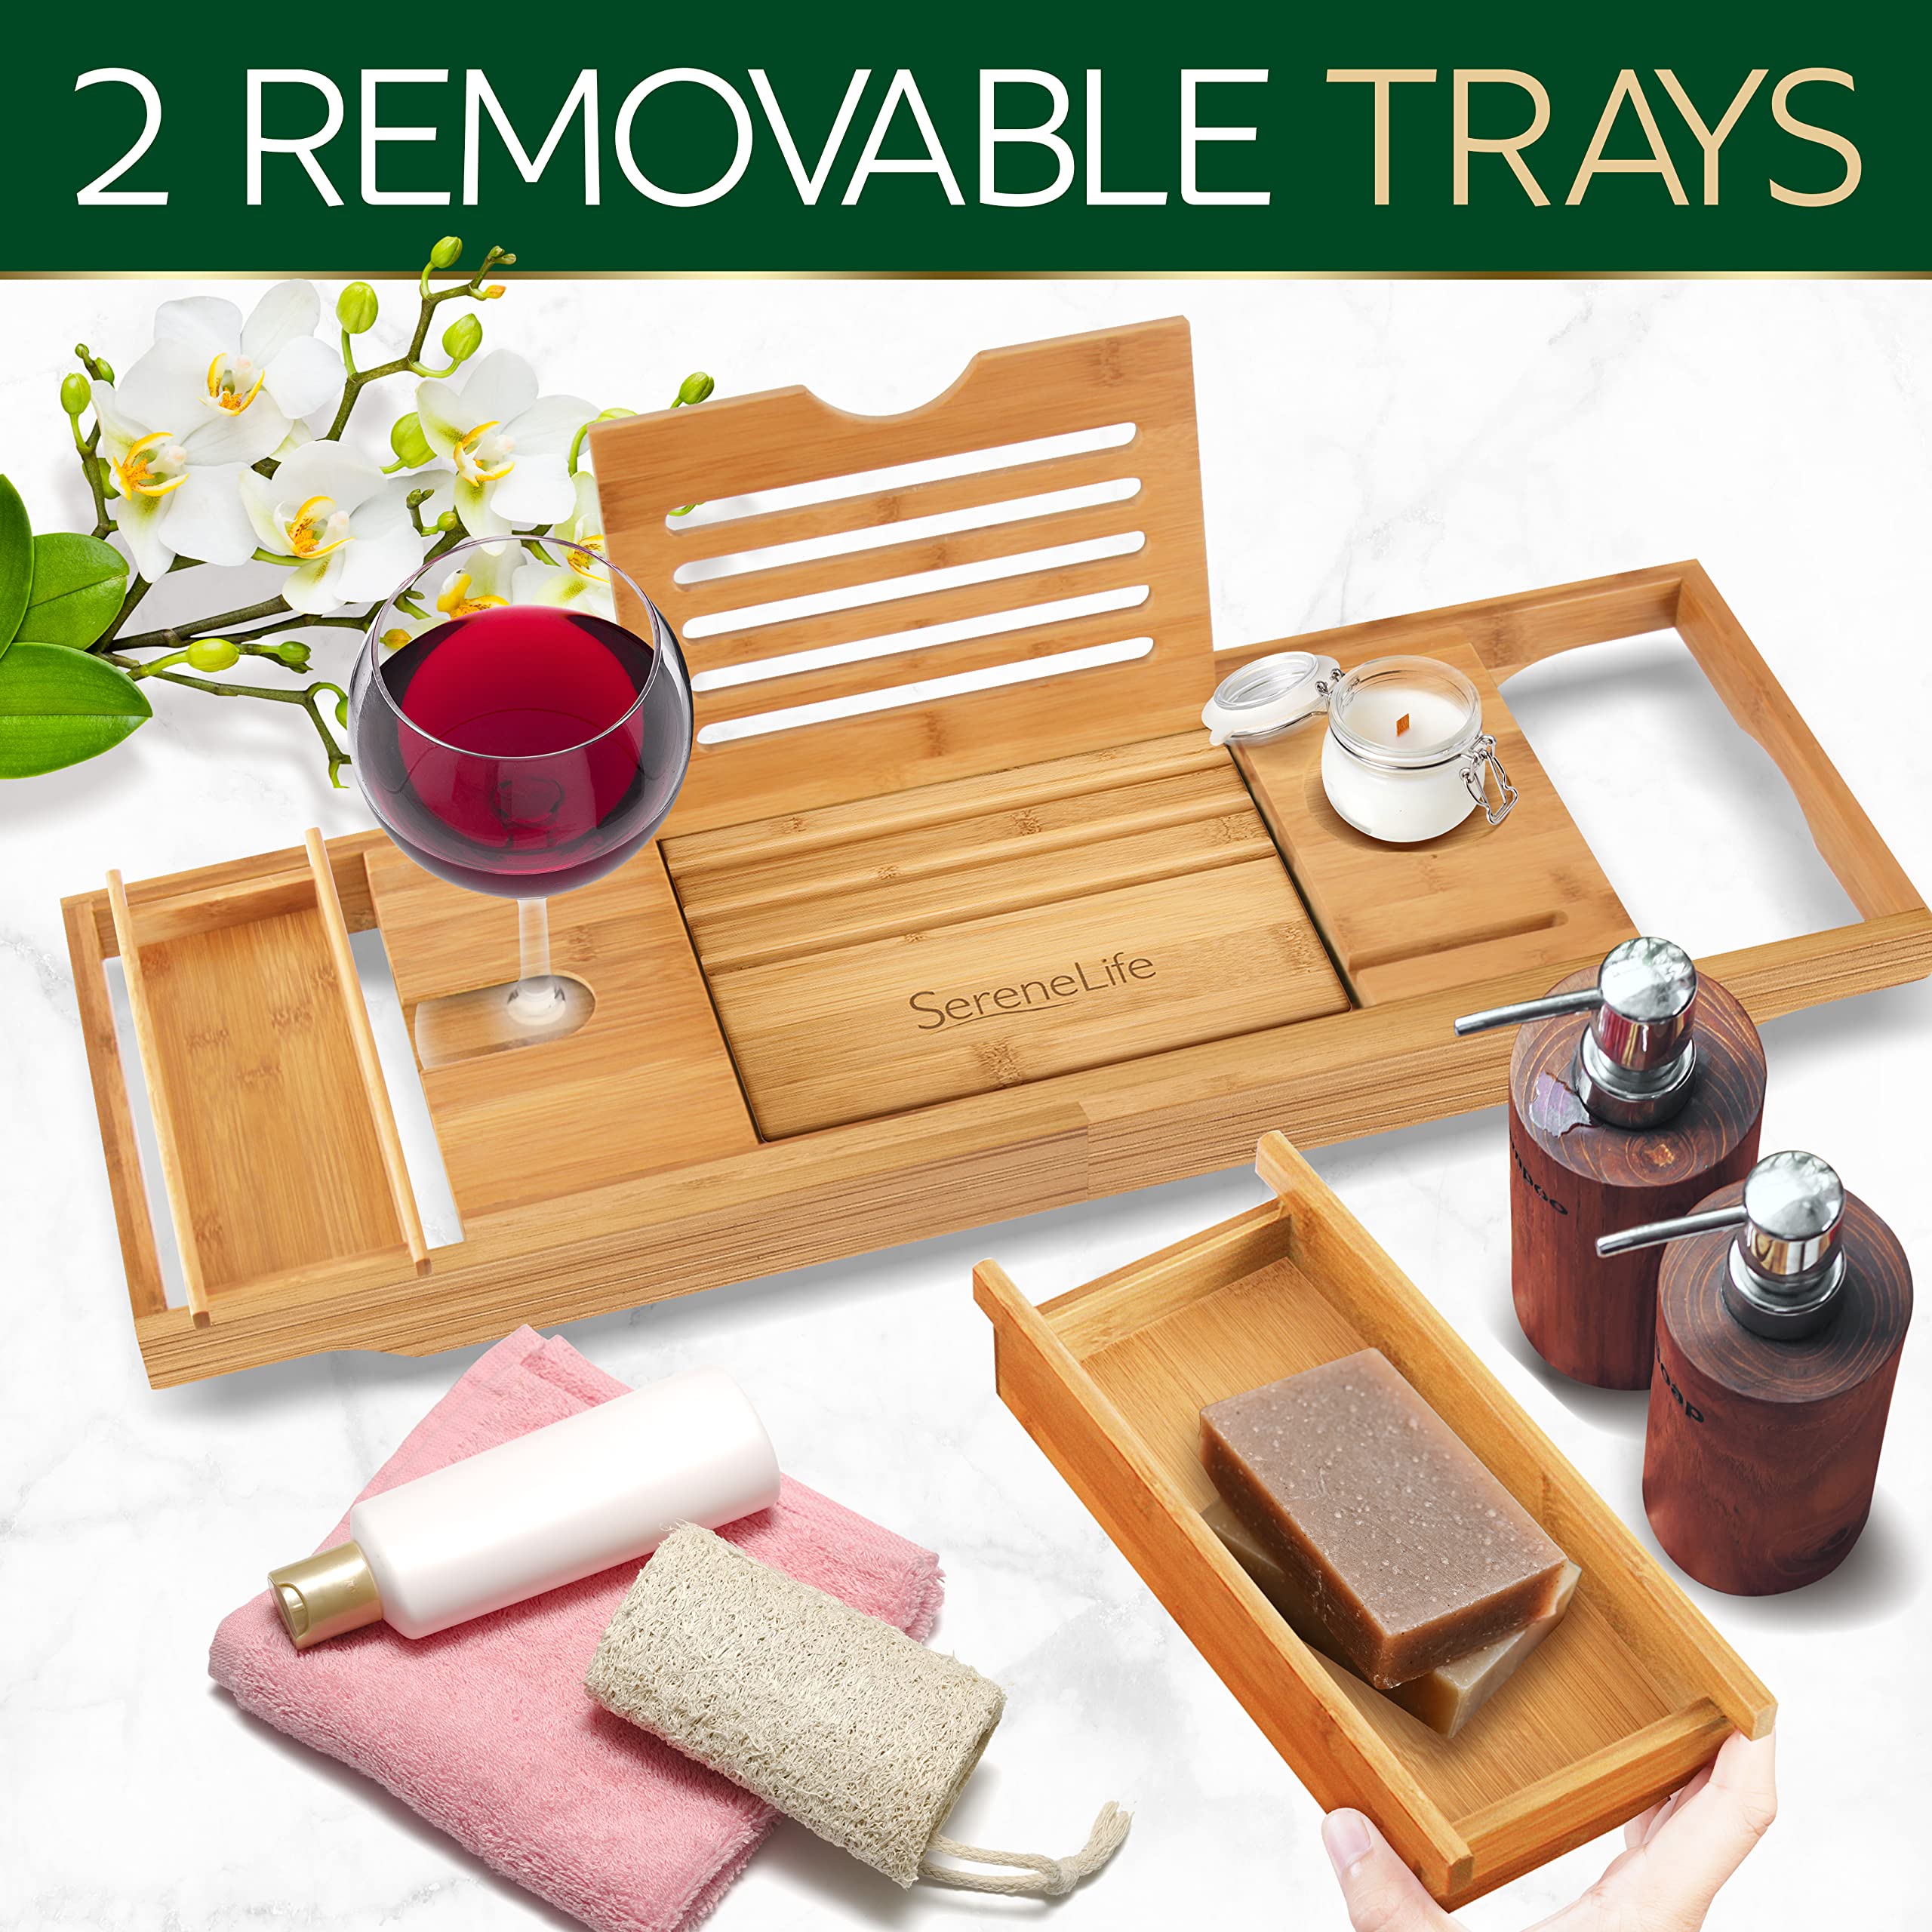 SereneLife Bath Caddy Breakfast Tray Combo with Gift Box-Natural Bamboo Wood Waterproof Bath Tub Caddy and Bed Tray with Folding Slide-Out Arms,Device Grooves,Wine Glass and Soap Holder